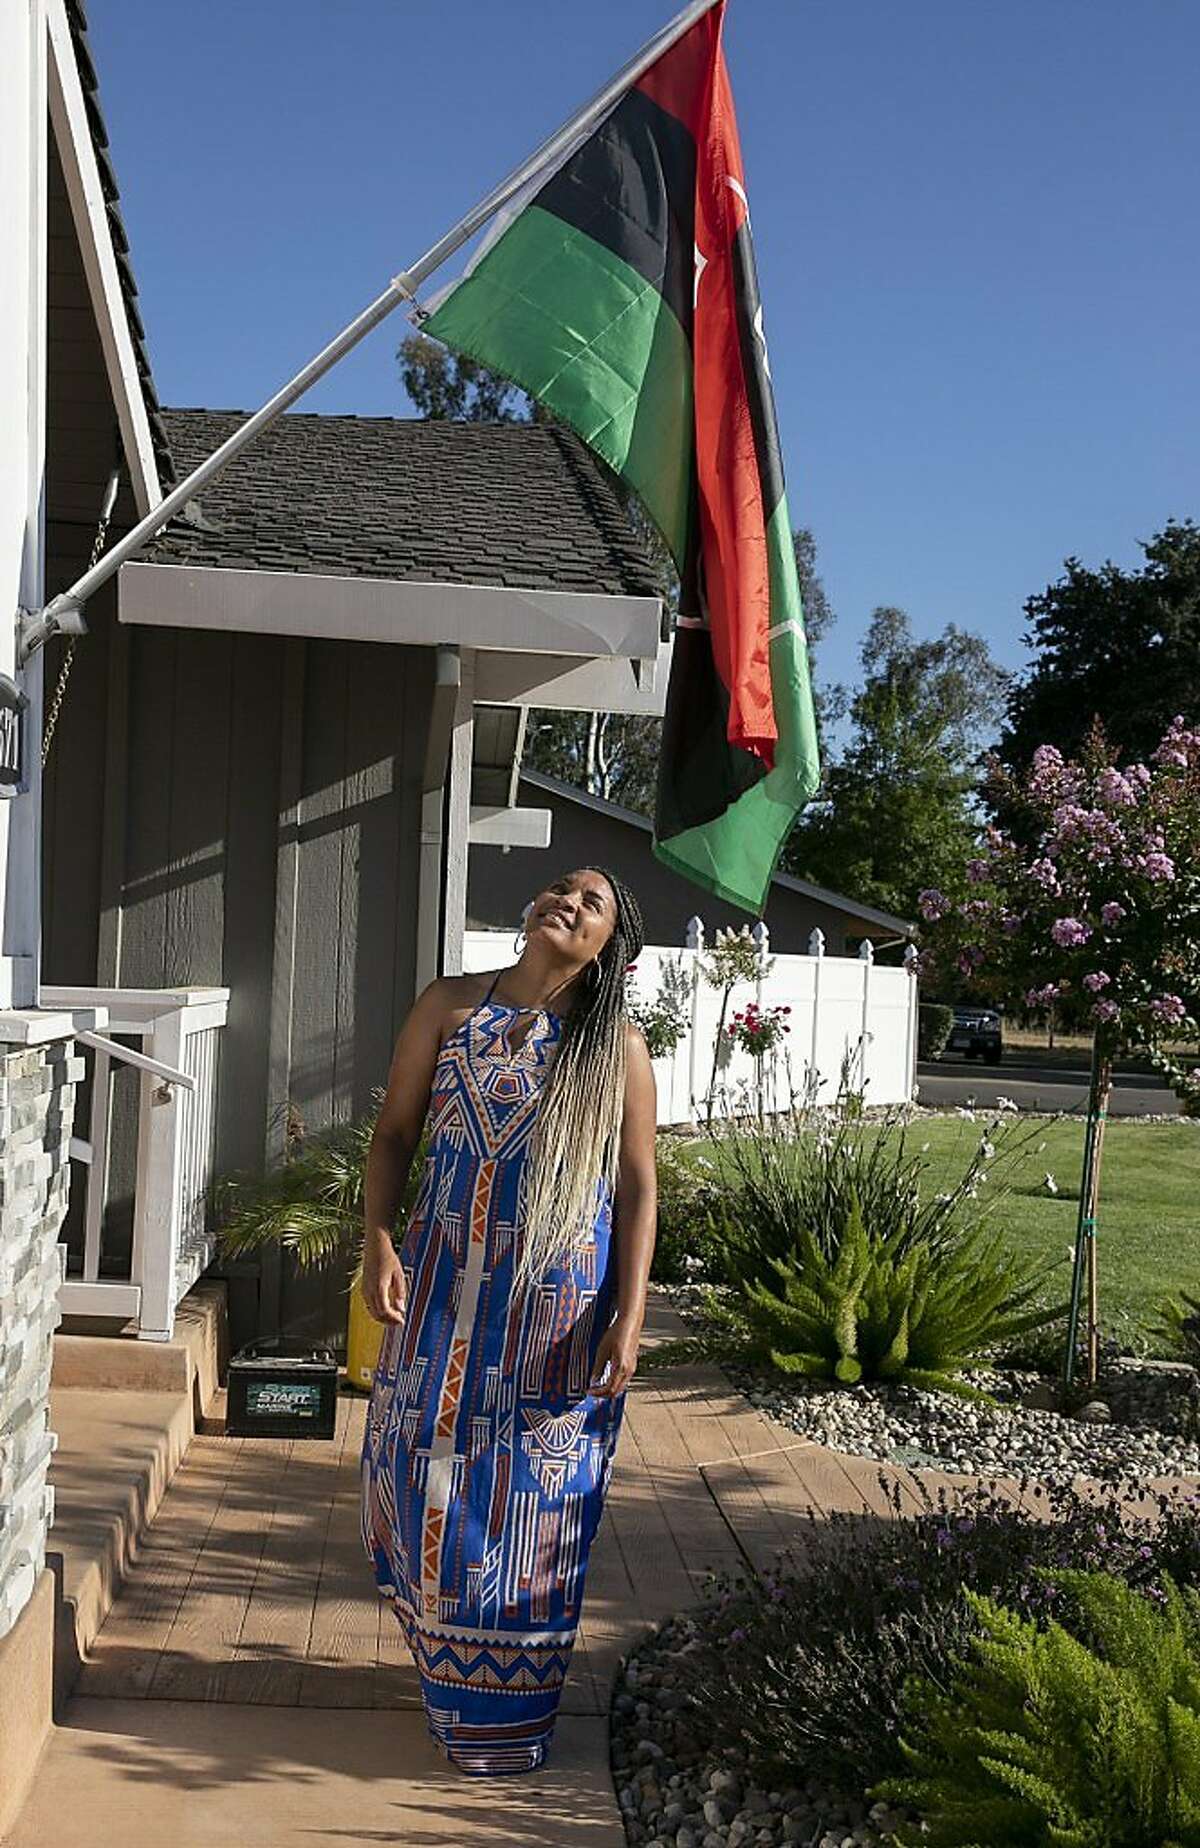 Sharie Wilson stands below the Pan African flag outside of her Elk Grove home on June 22, 2020. Wilson says that she raised the flag to celebrate Juneteenth as a way to help educate her neighbors about the holiday.